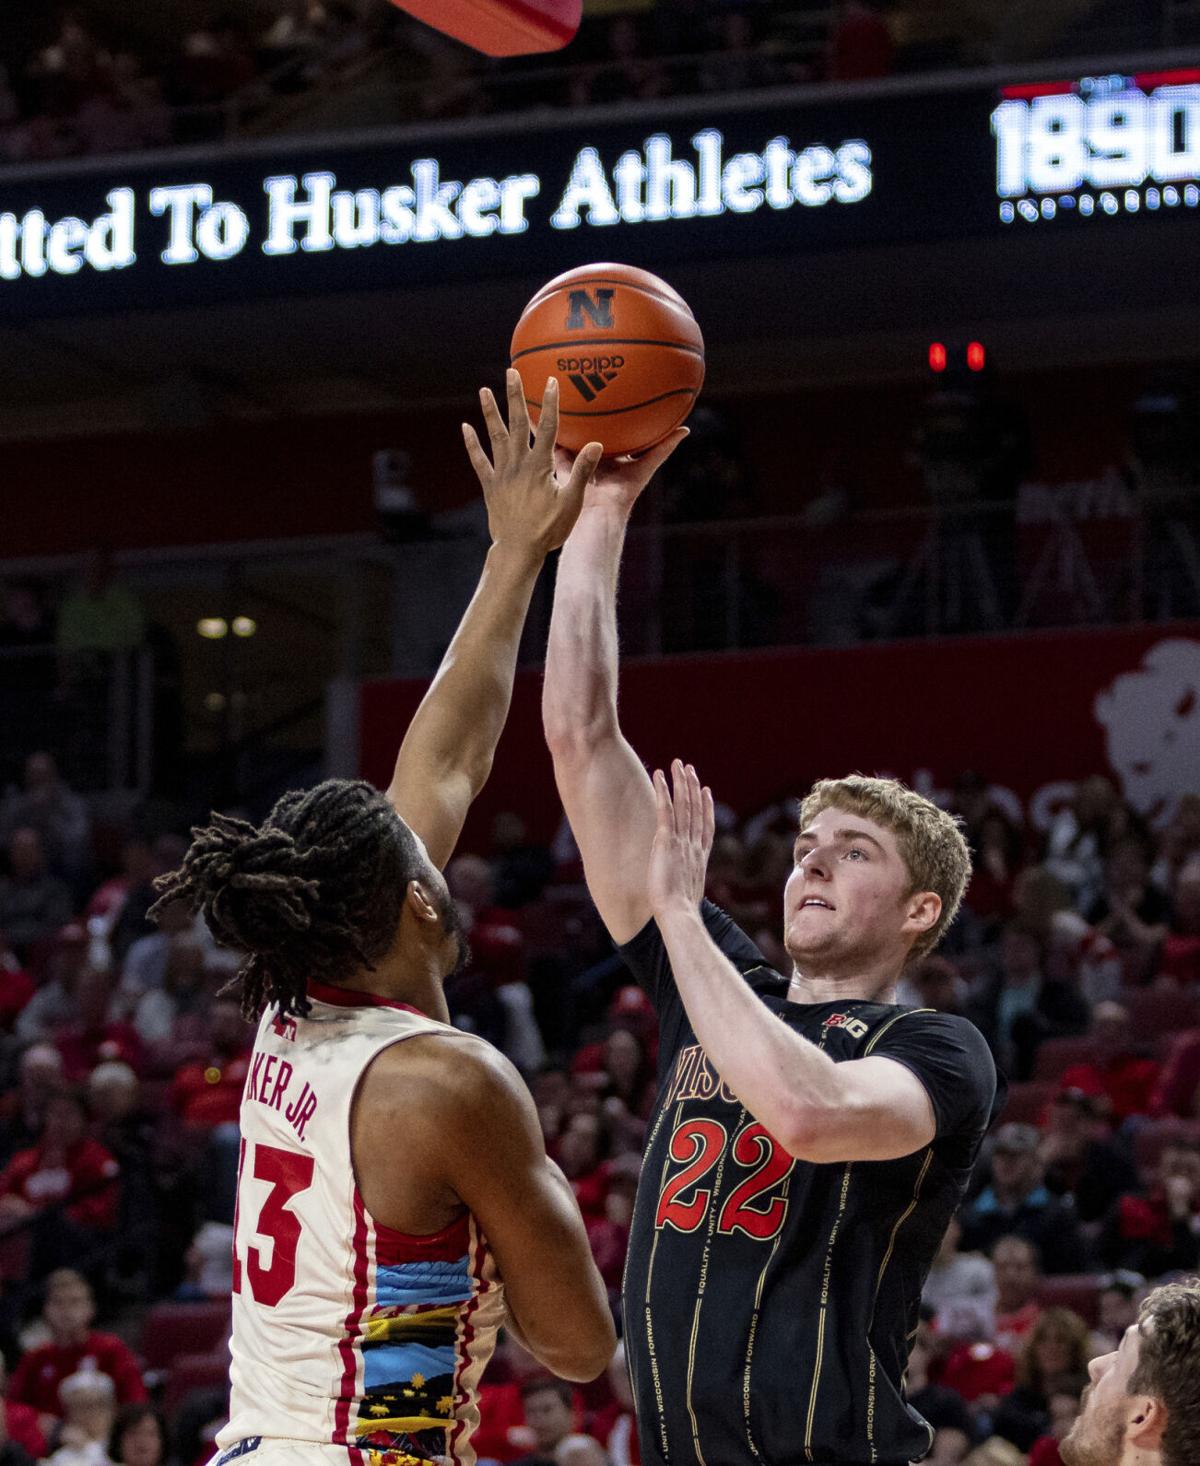 3 things that stood out from Wisconsin men's basketball's win over Nebraska